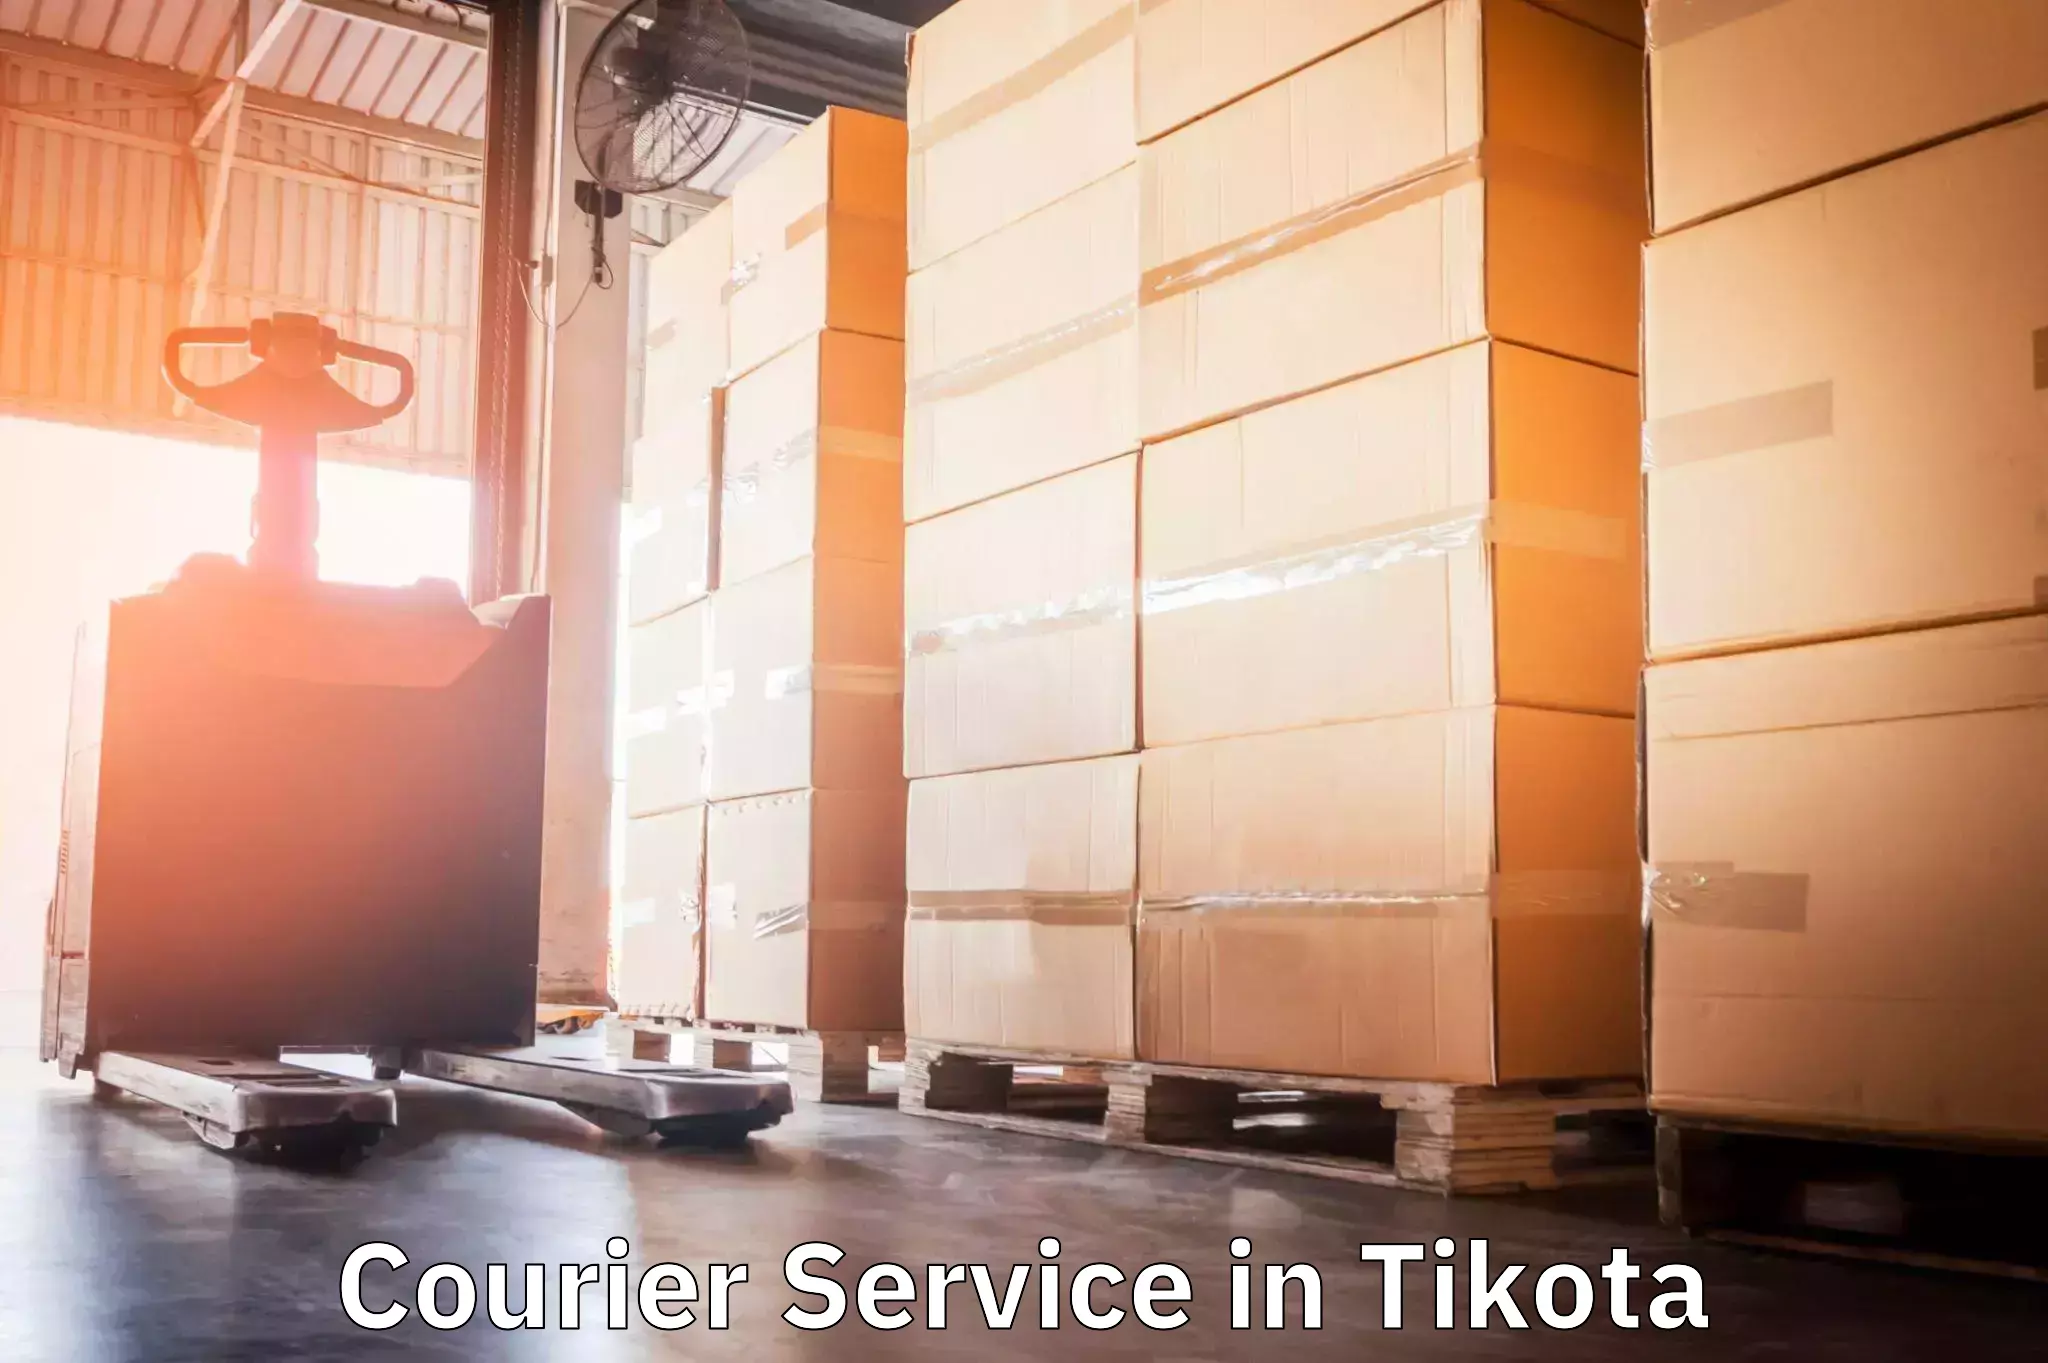 Flexible delivery schedules in Tikota